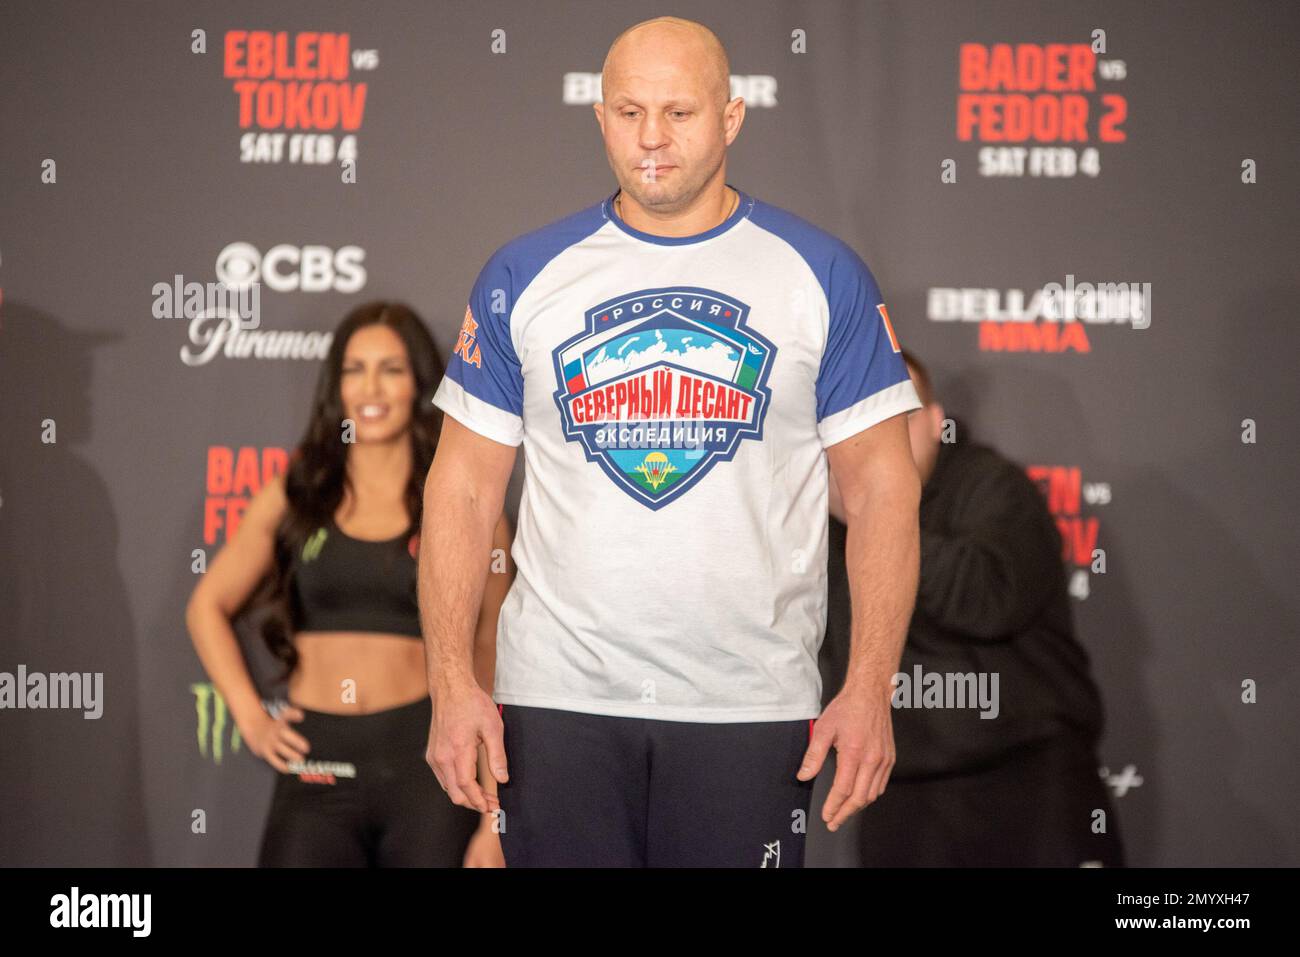 Los Angeles, California - February 3nd: Fedor Emelianenko weighs in at 236.2lb ahead of his Heavyweight Title fight at Bellator 290 Bader vs Fedor 2 at The Forum on February 4th, 2023 in Los Angeles, California, United States. (Photo by Matt Davies) Credit: Px Images/Alamy Live News Stock Photo